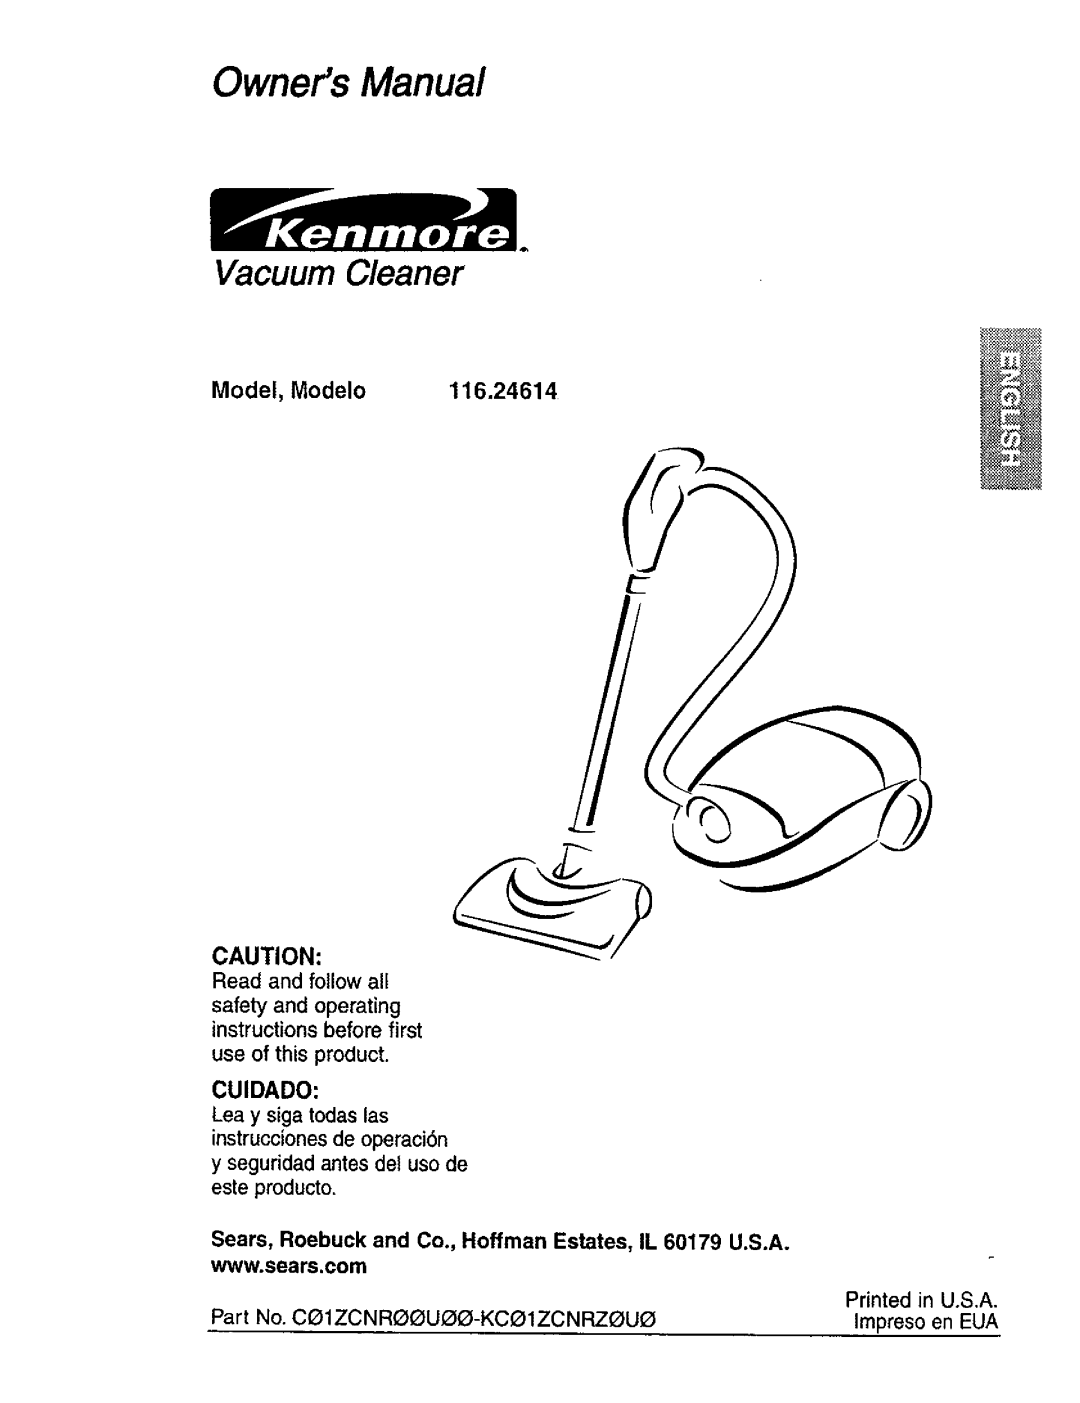 Kenmore 116.24614 owner manual Model, Modelo, Read and follow all, safety and operating instructions before first, Cuidado 